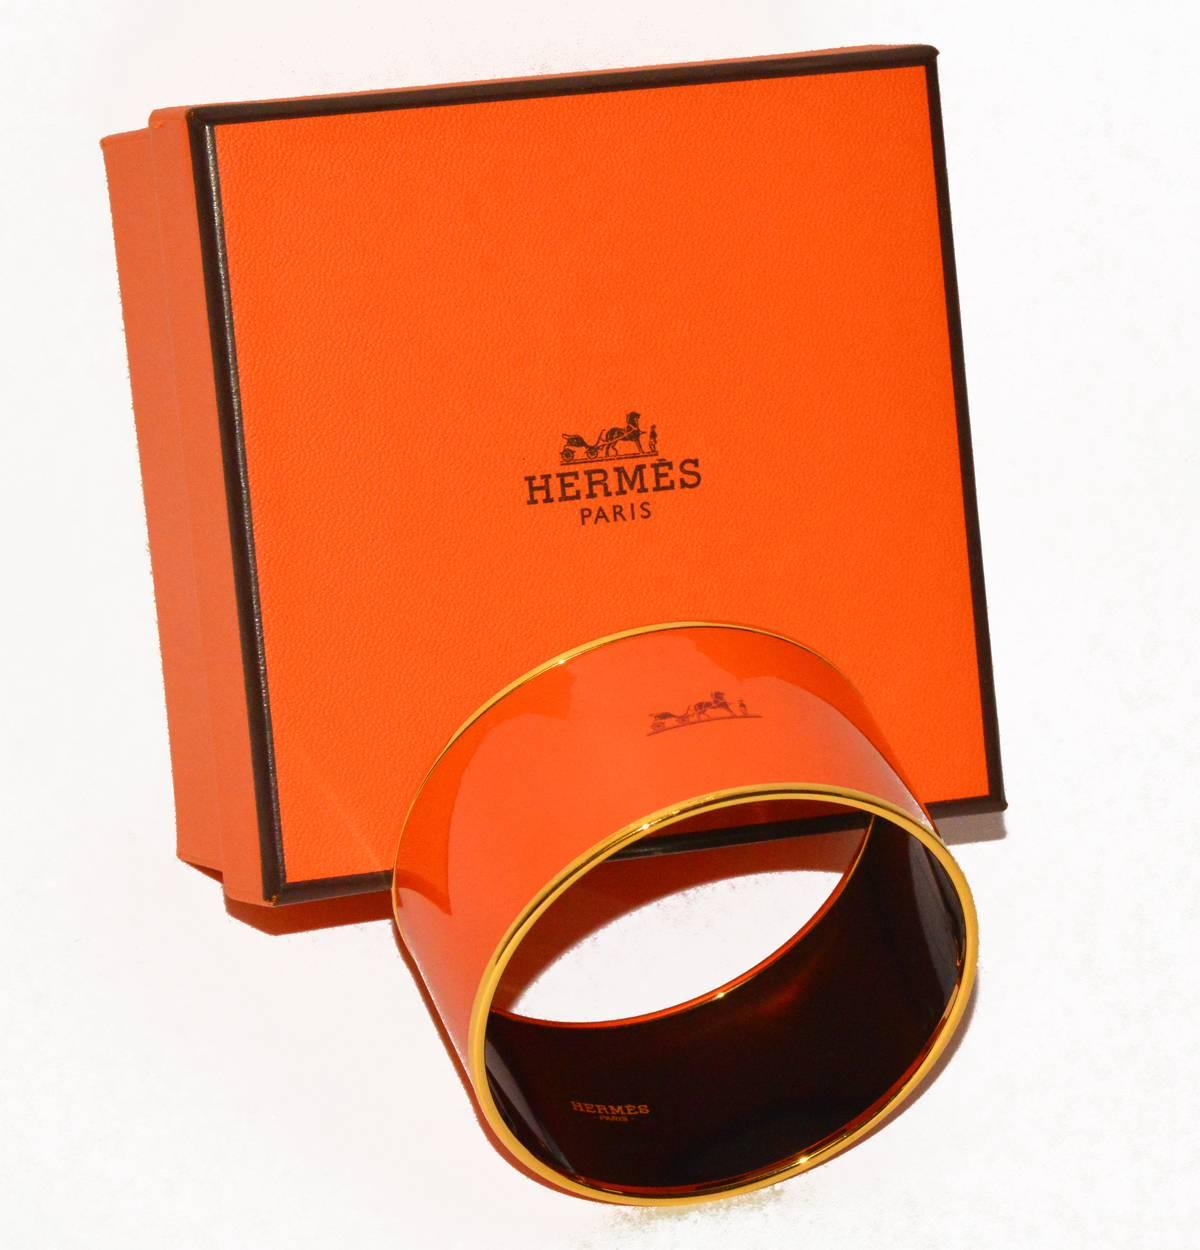 Nothing says Hermes like this chic, iconic, wide enamel bangle, perfect for summer or any time. Mint condition, new in box. Wear separately or stack with others. 